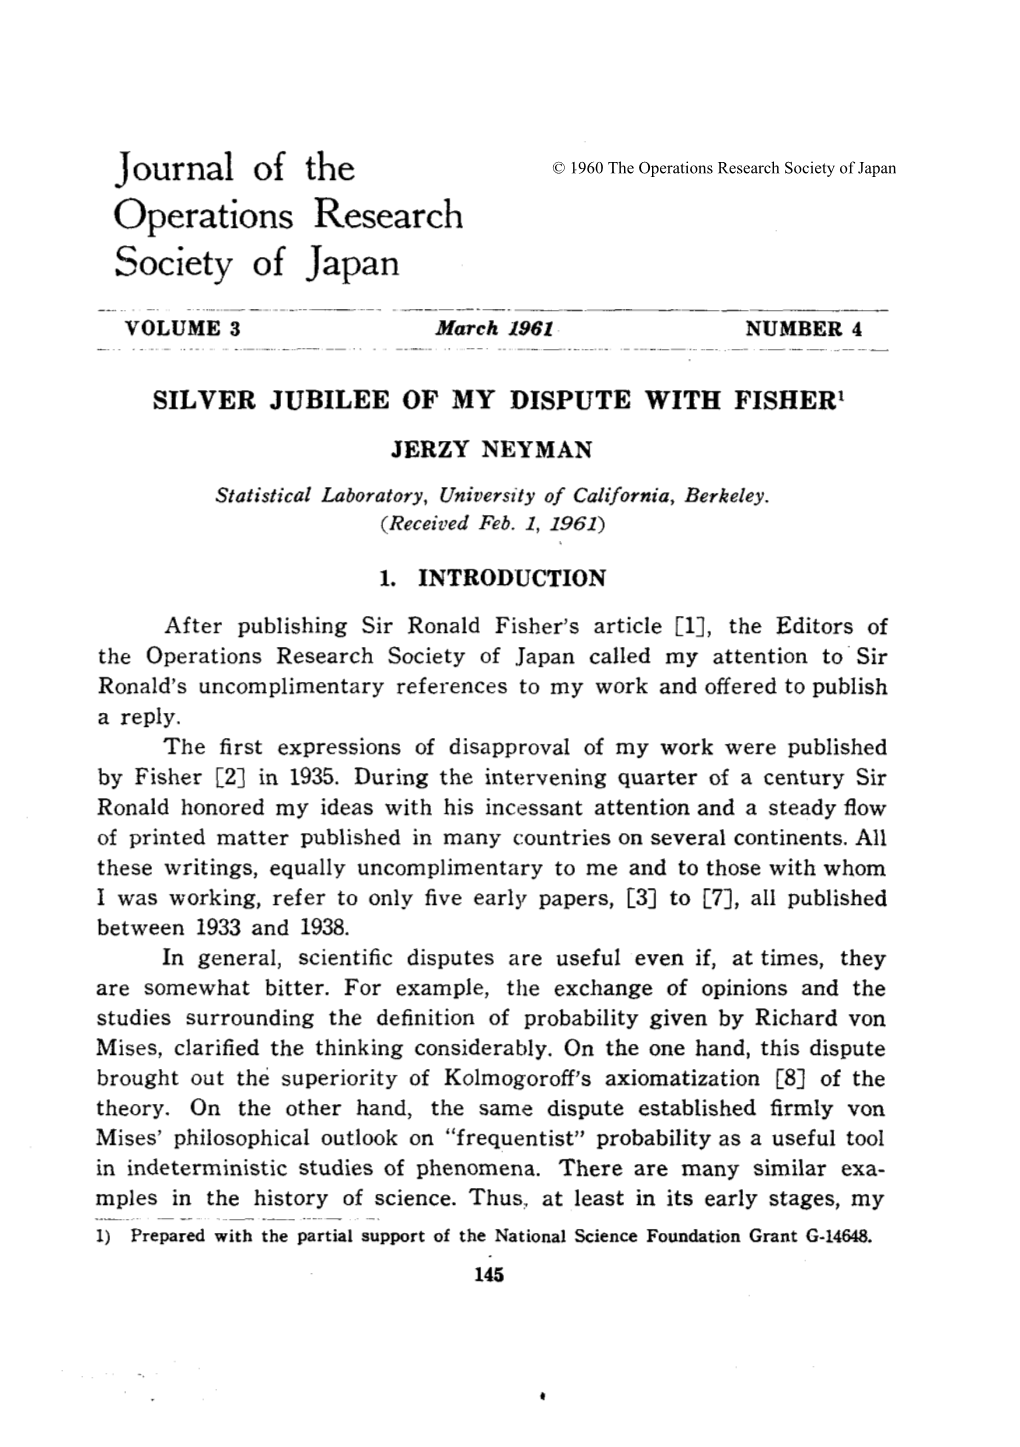 Journal of the Operations Research Society of Japan